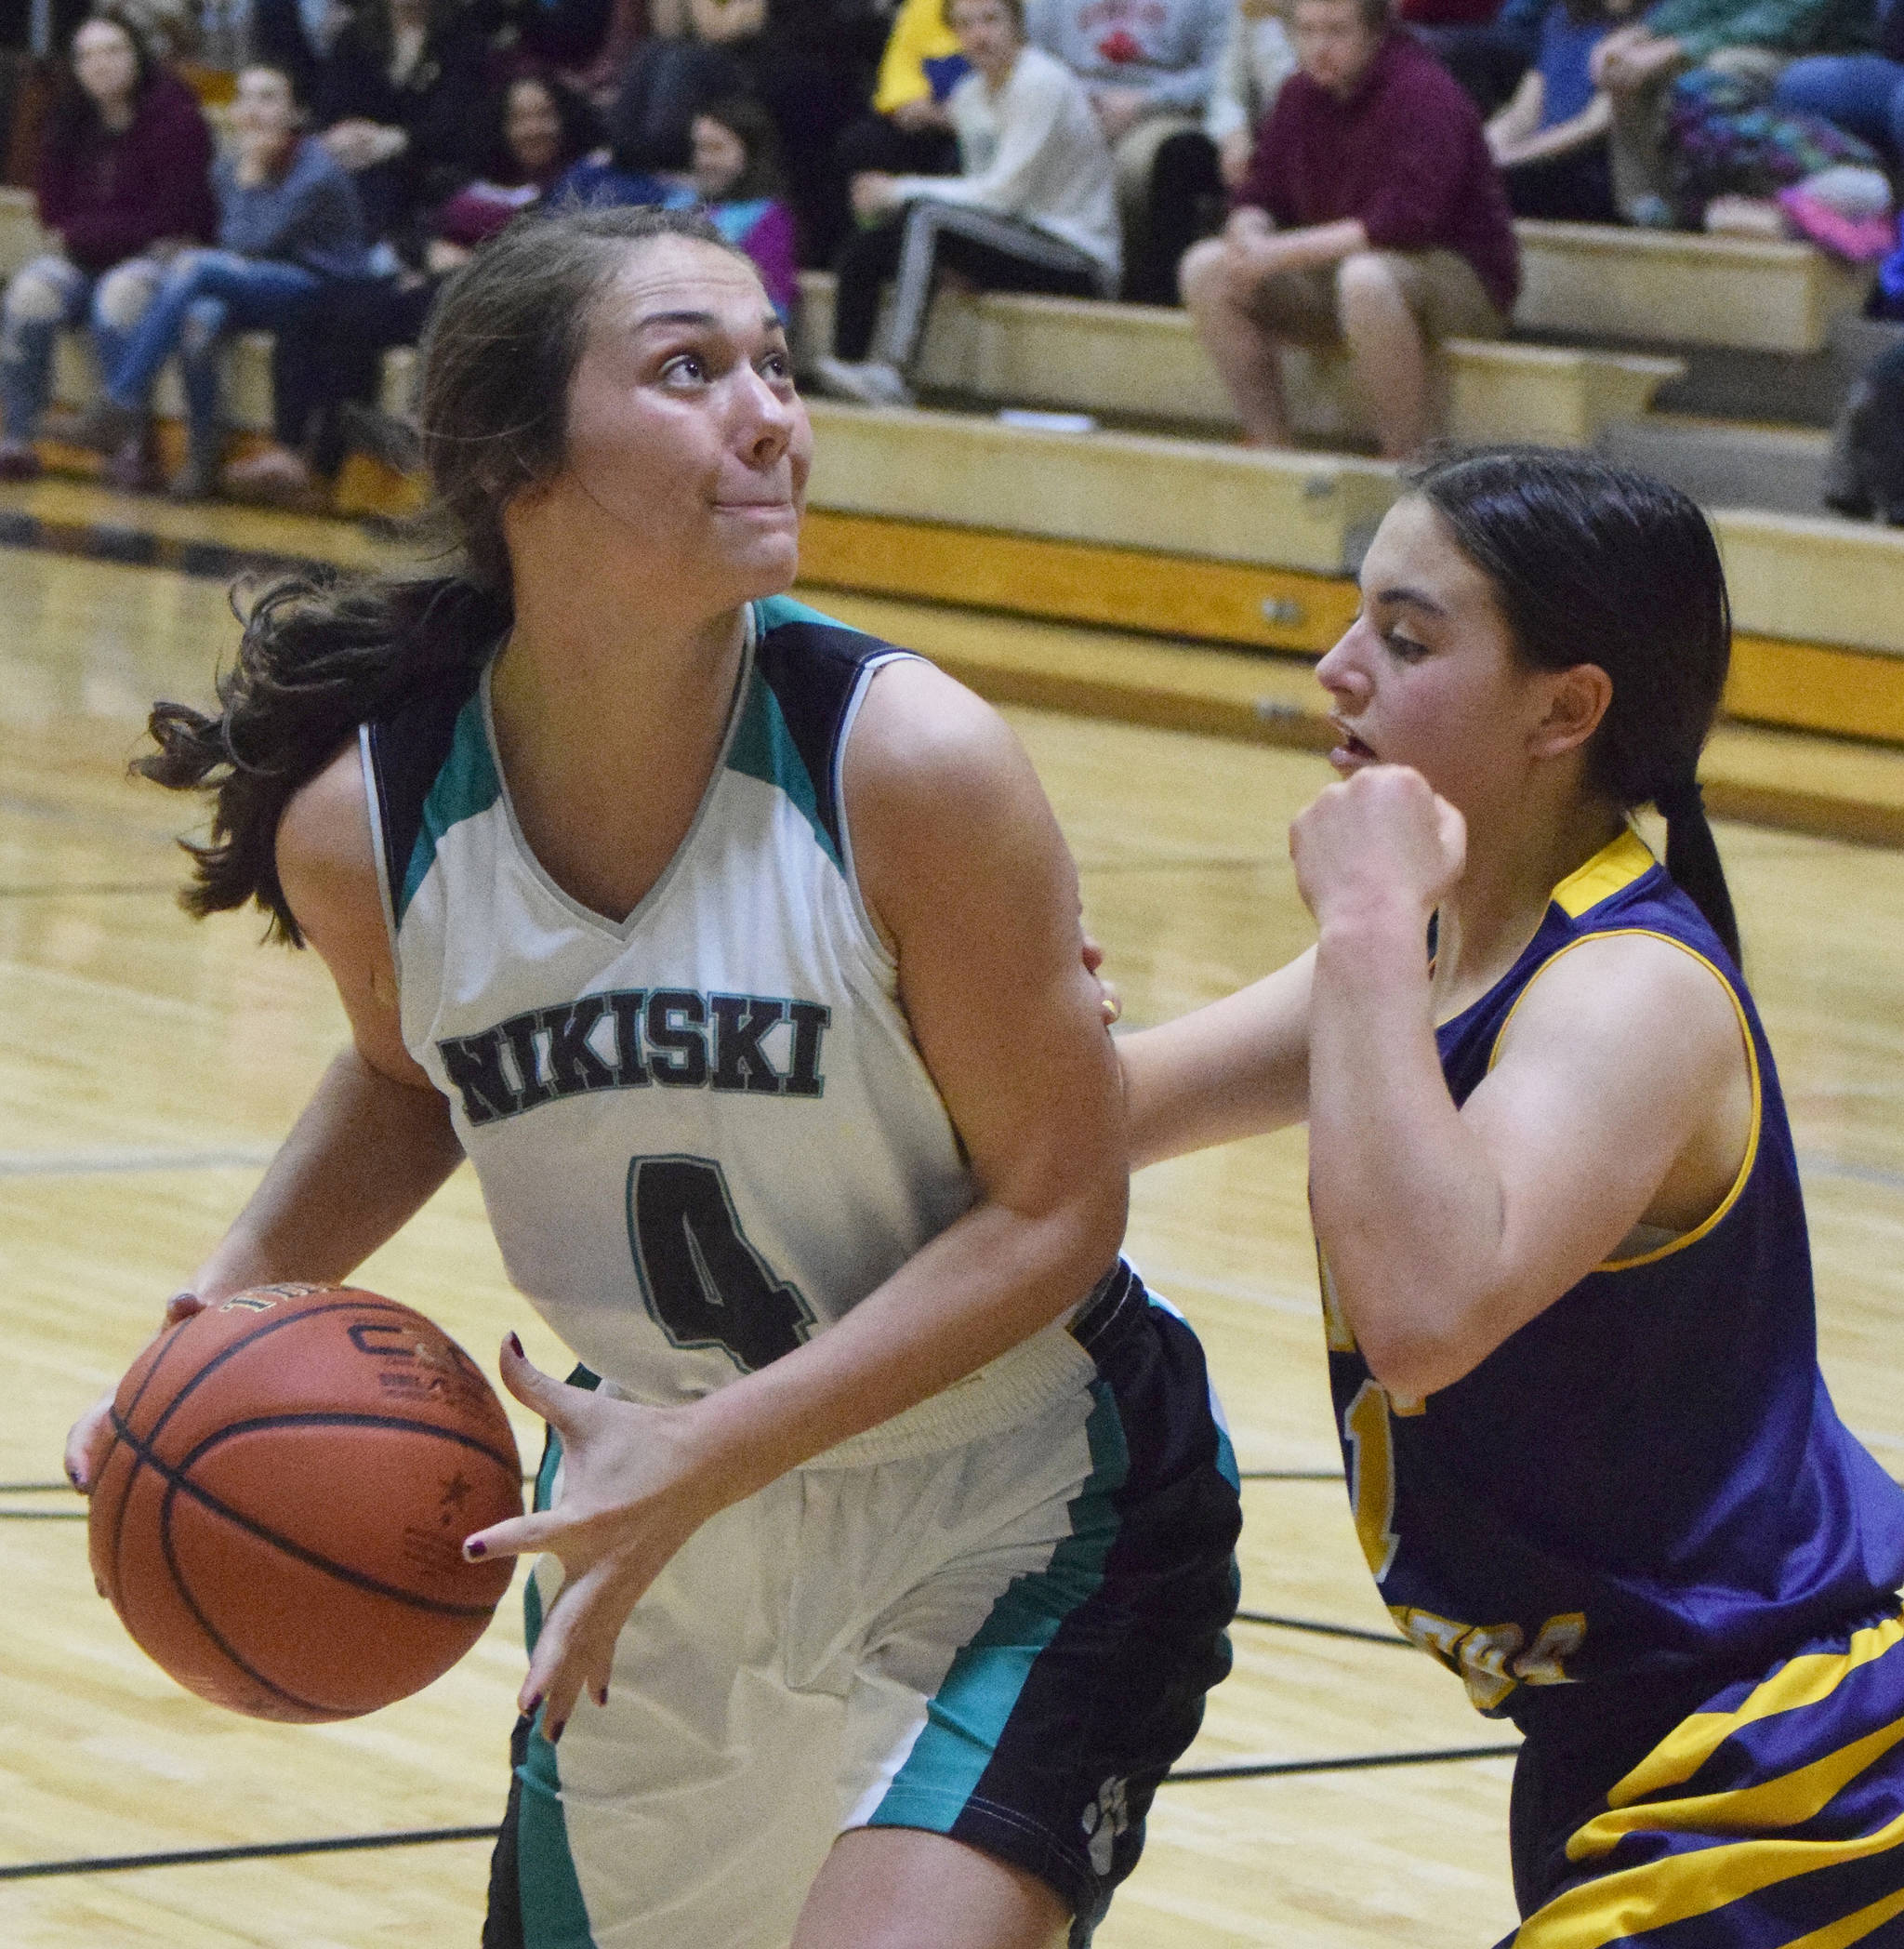 Nikiski senior Emma Wik (left) eyes the rim with Homer defender Sailey Rhodes guarding her March 1, 2019, in a Southcentral Conference clash at Nikiski High School. (Photo by Joey Klecka/Peninsula Clarion)